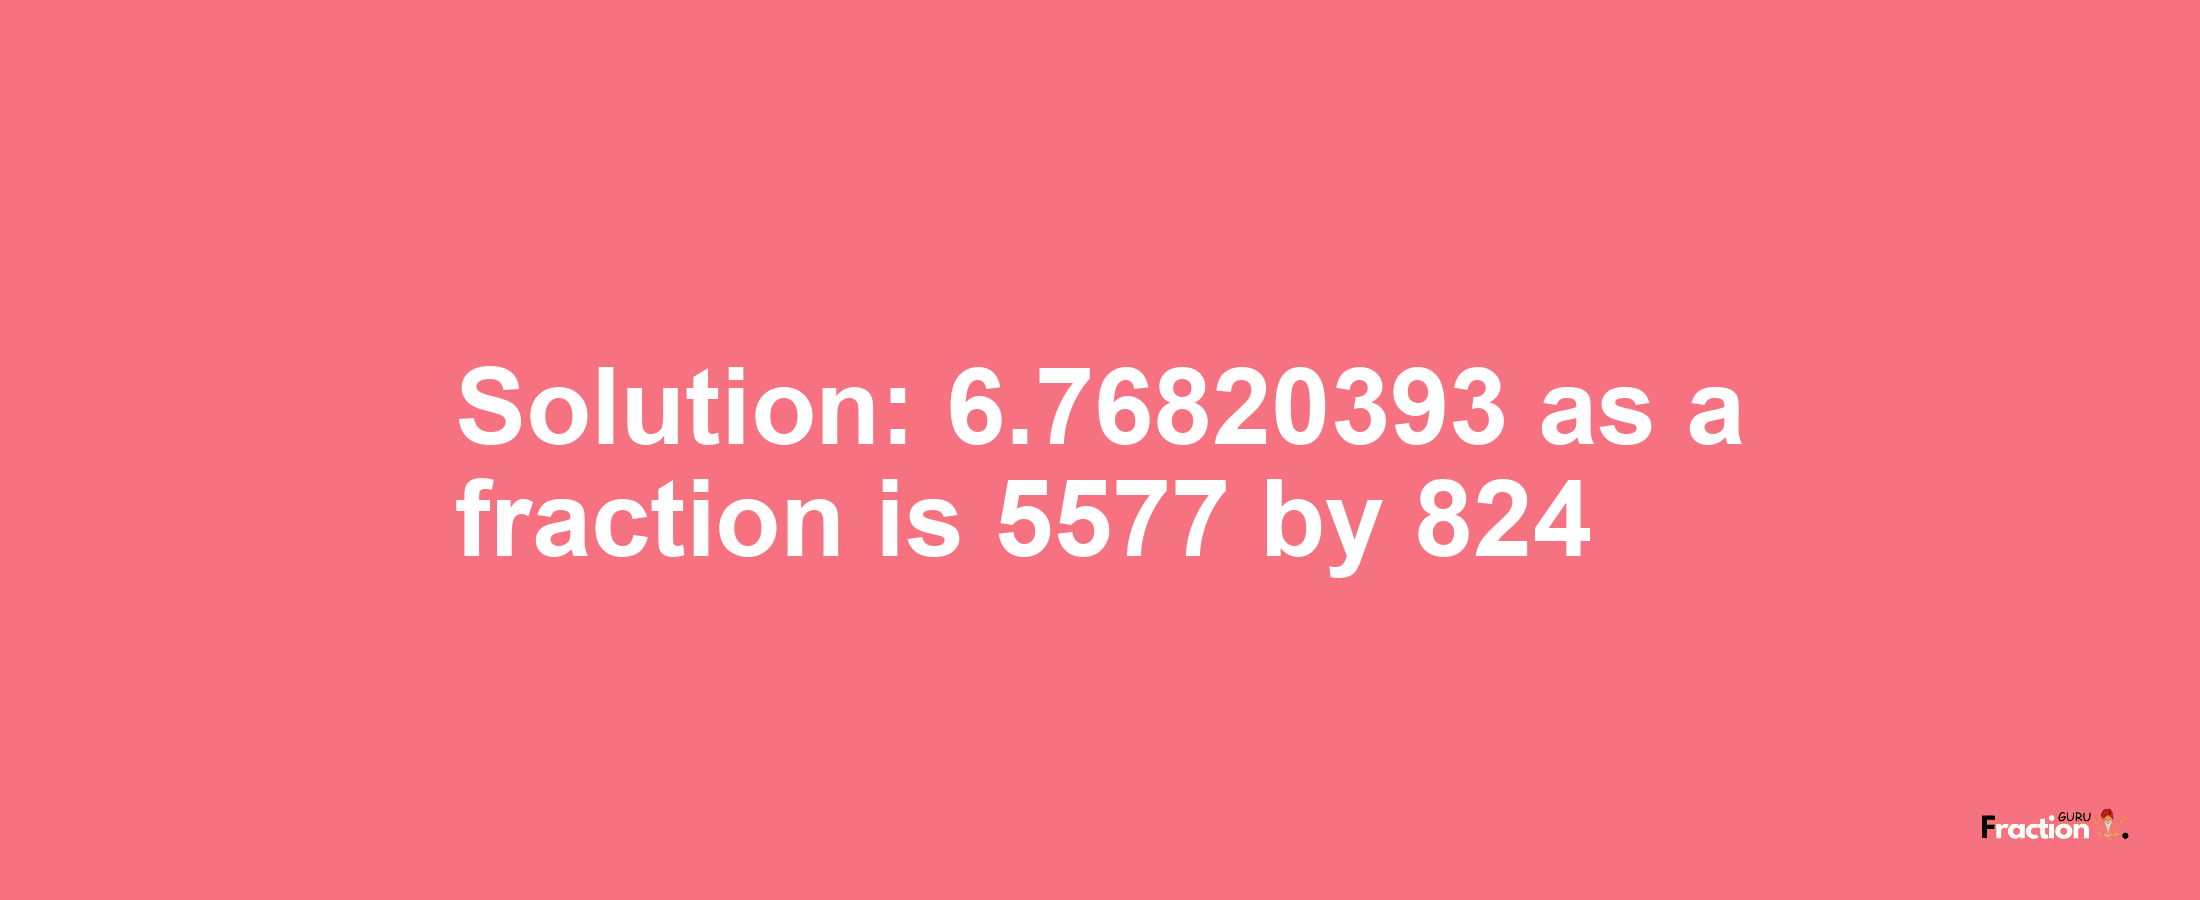 Solution:6.76820393 as a fraction is 5577/824